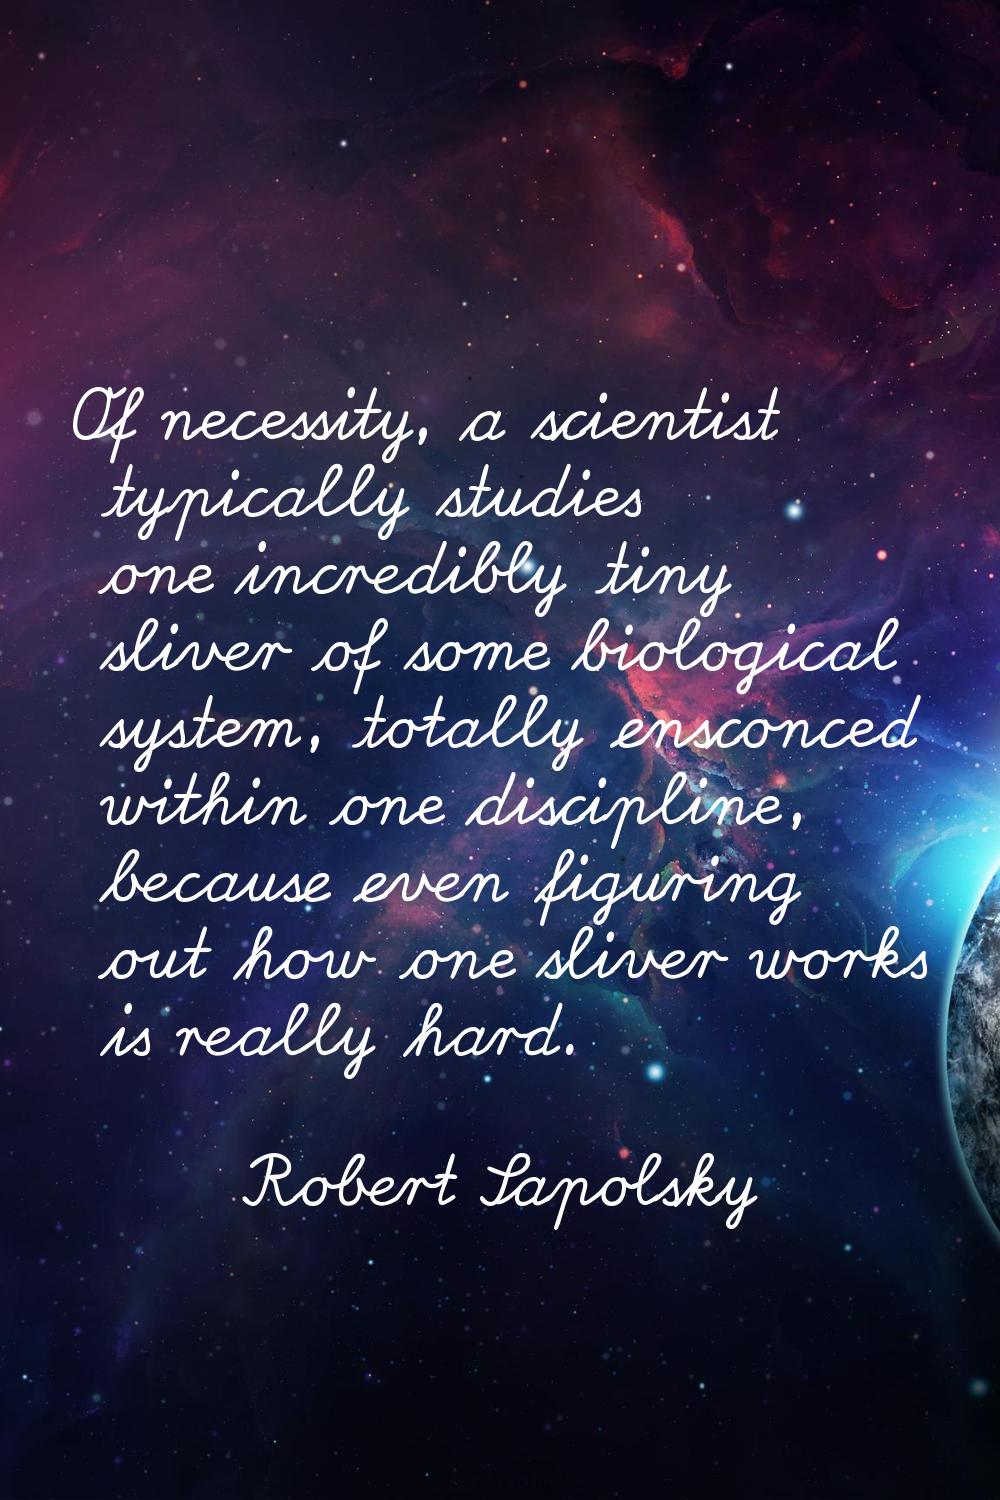 Of necessity, a scientist typically studies one incredibly tiny sliver of some biological system, t